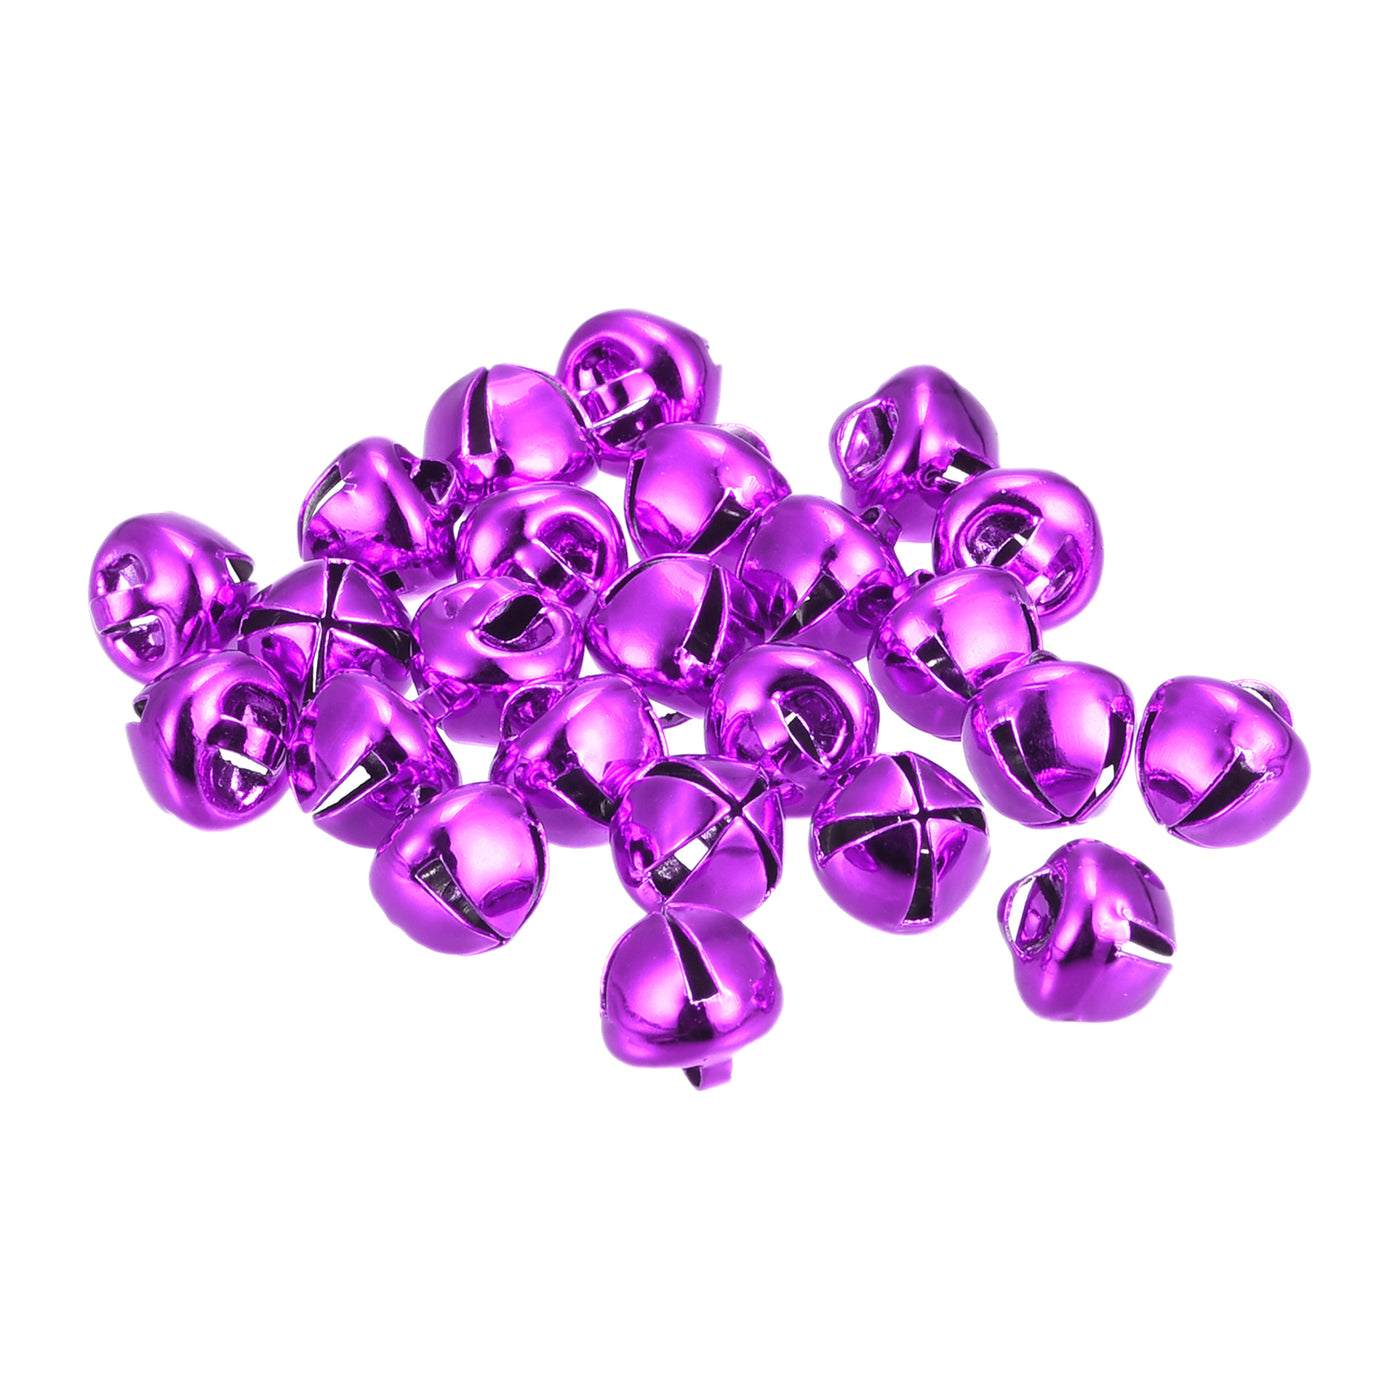 uxcell Uxcell Jingle Bells, 8mm 120pcs Small Bells for Crafts DIY Christmas, Purple